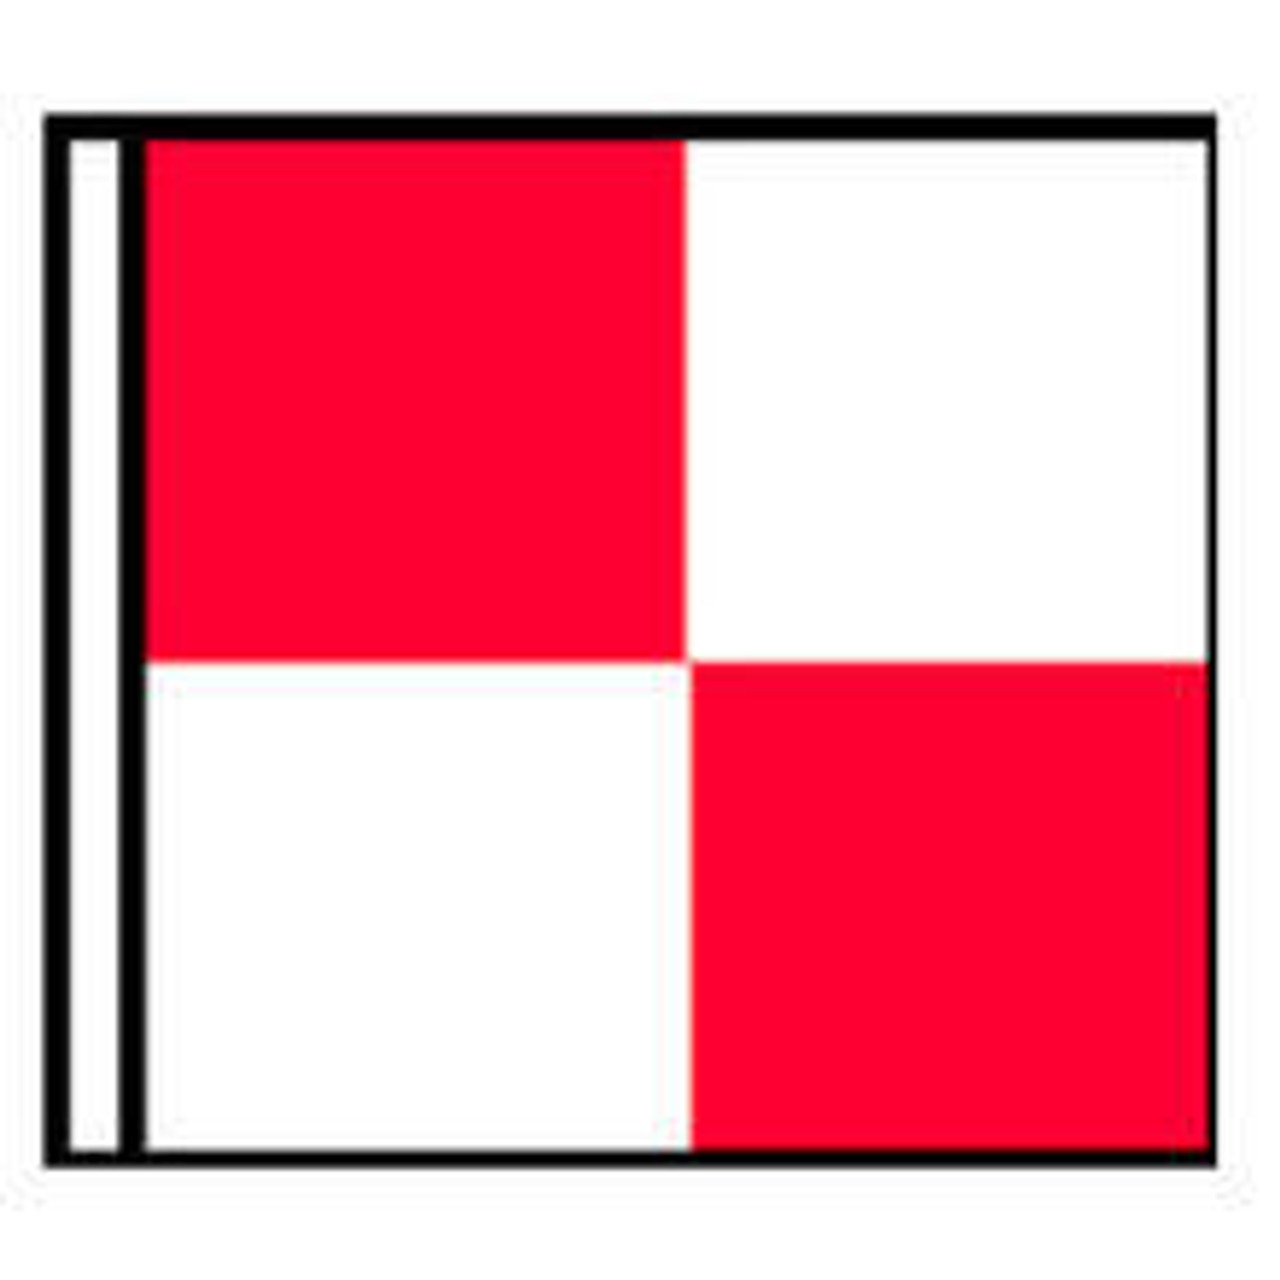 A flag with four squares in a checkerboard pattern. The top left and bottom right squares are red and the top right and bottom left squares are white.